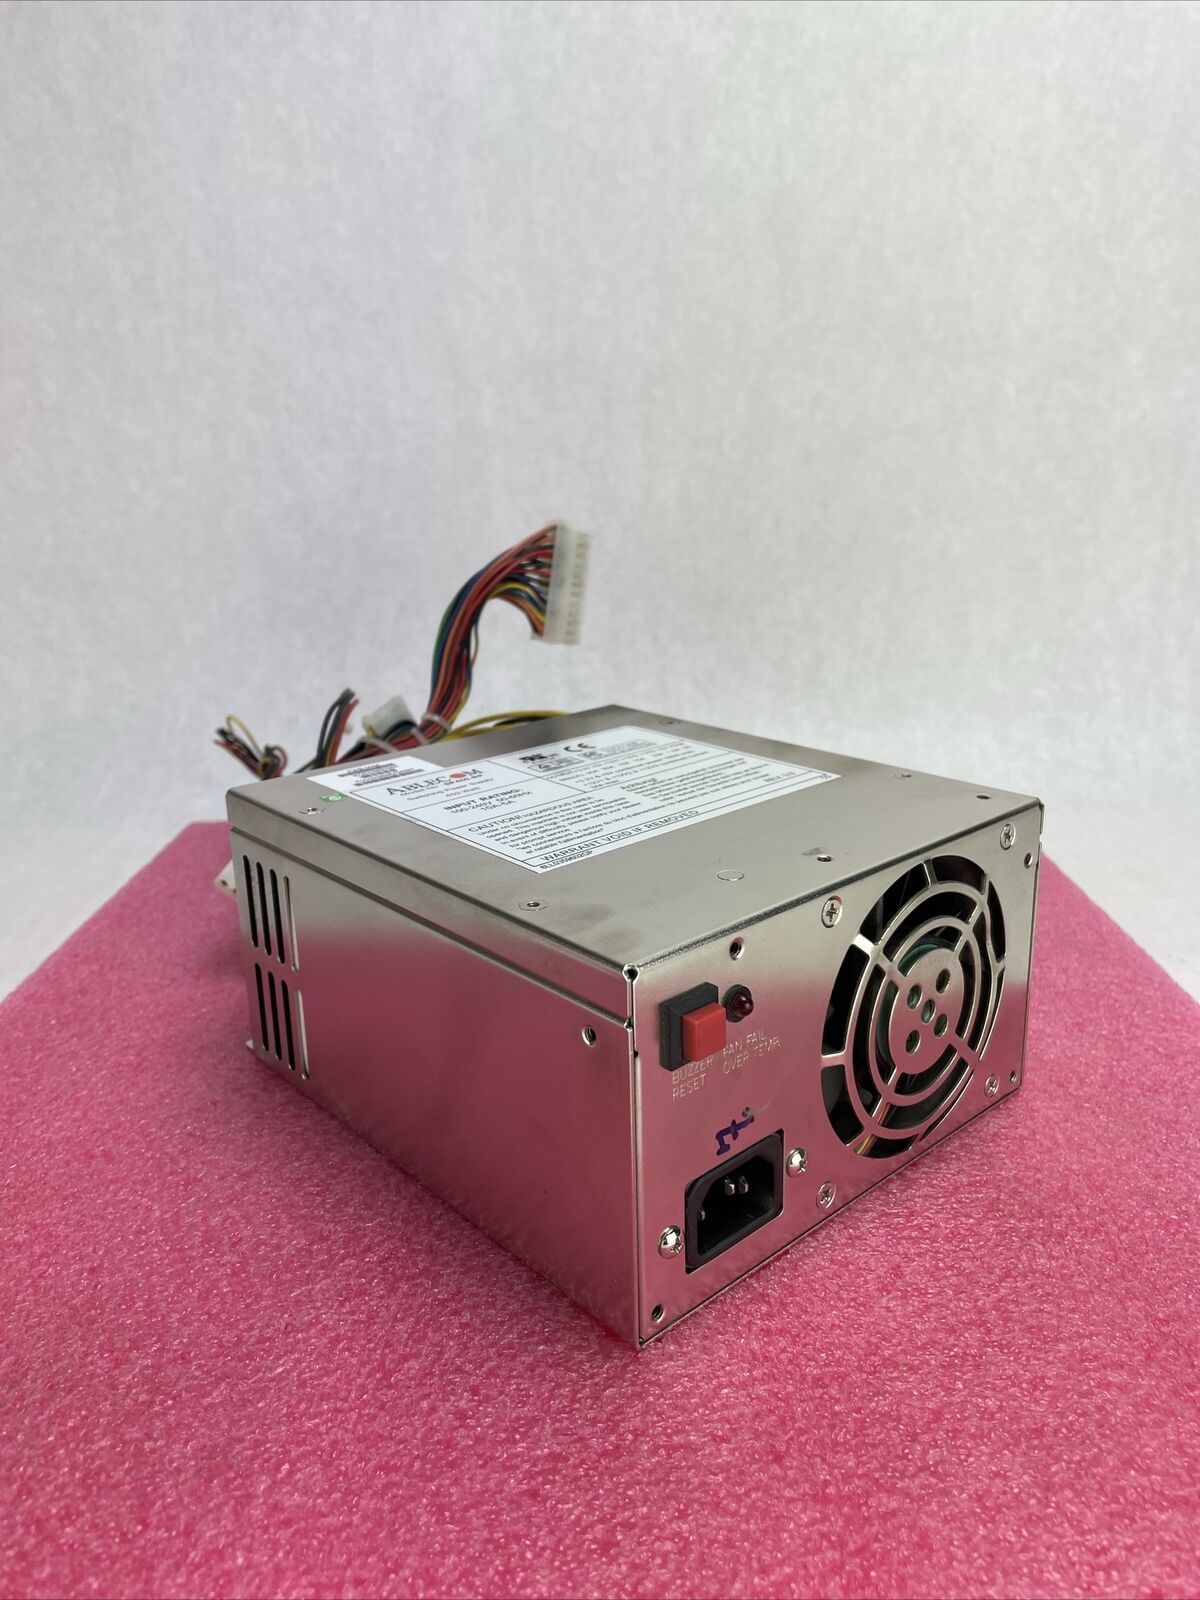 Ablecom SP450-RP 450W Switching Power Supply